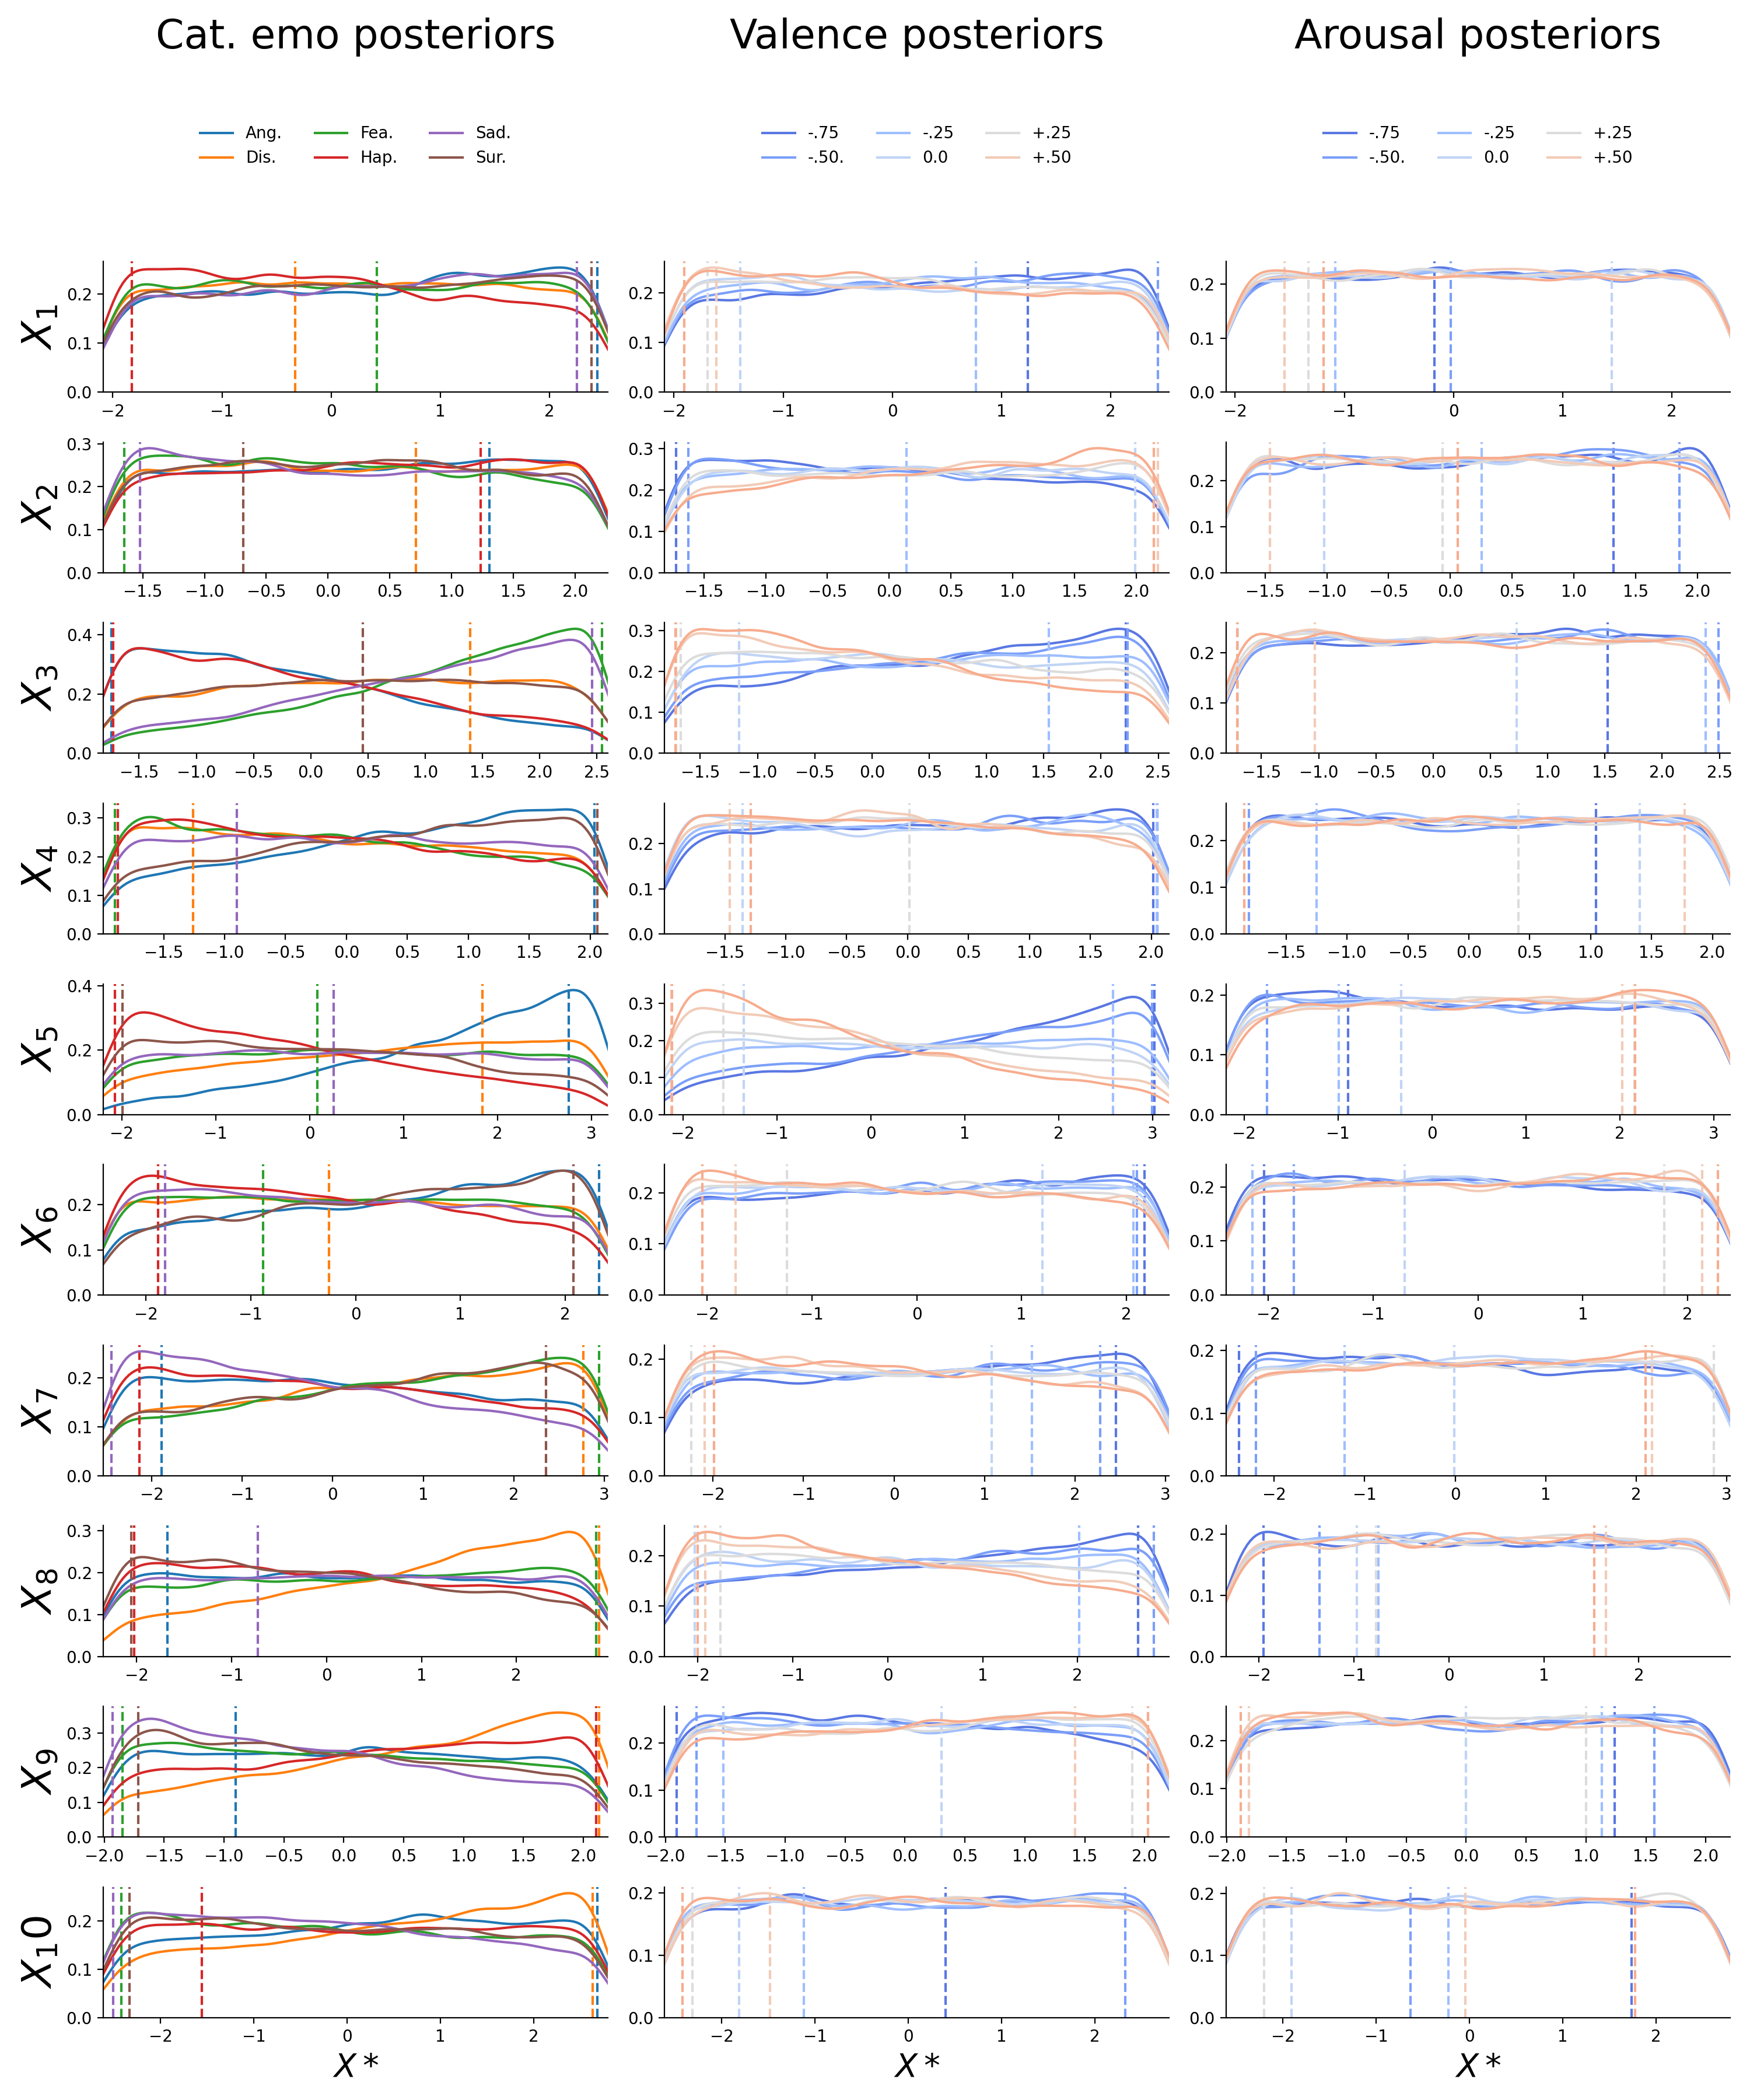 Posterior distributions for the first ten static features (\(X_{1}-X_{10}\); in rows) for the inverted categorical emotion model (left; different emotions as separate lines), the inverted valence model (middle; different levels as separate lines), and the inverted arousal model (right; different levels as separate lines). The dashed vertical lines represent the value chosen for the reconstructions (i.e., the midpoint of the 5% HDI interval). The drop at the edges of the posterior is an artifact induced by the kernel density estimation.